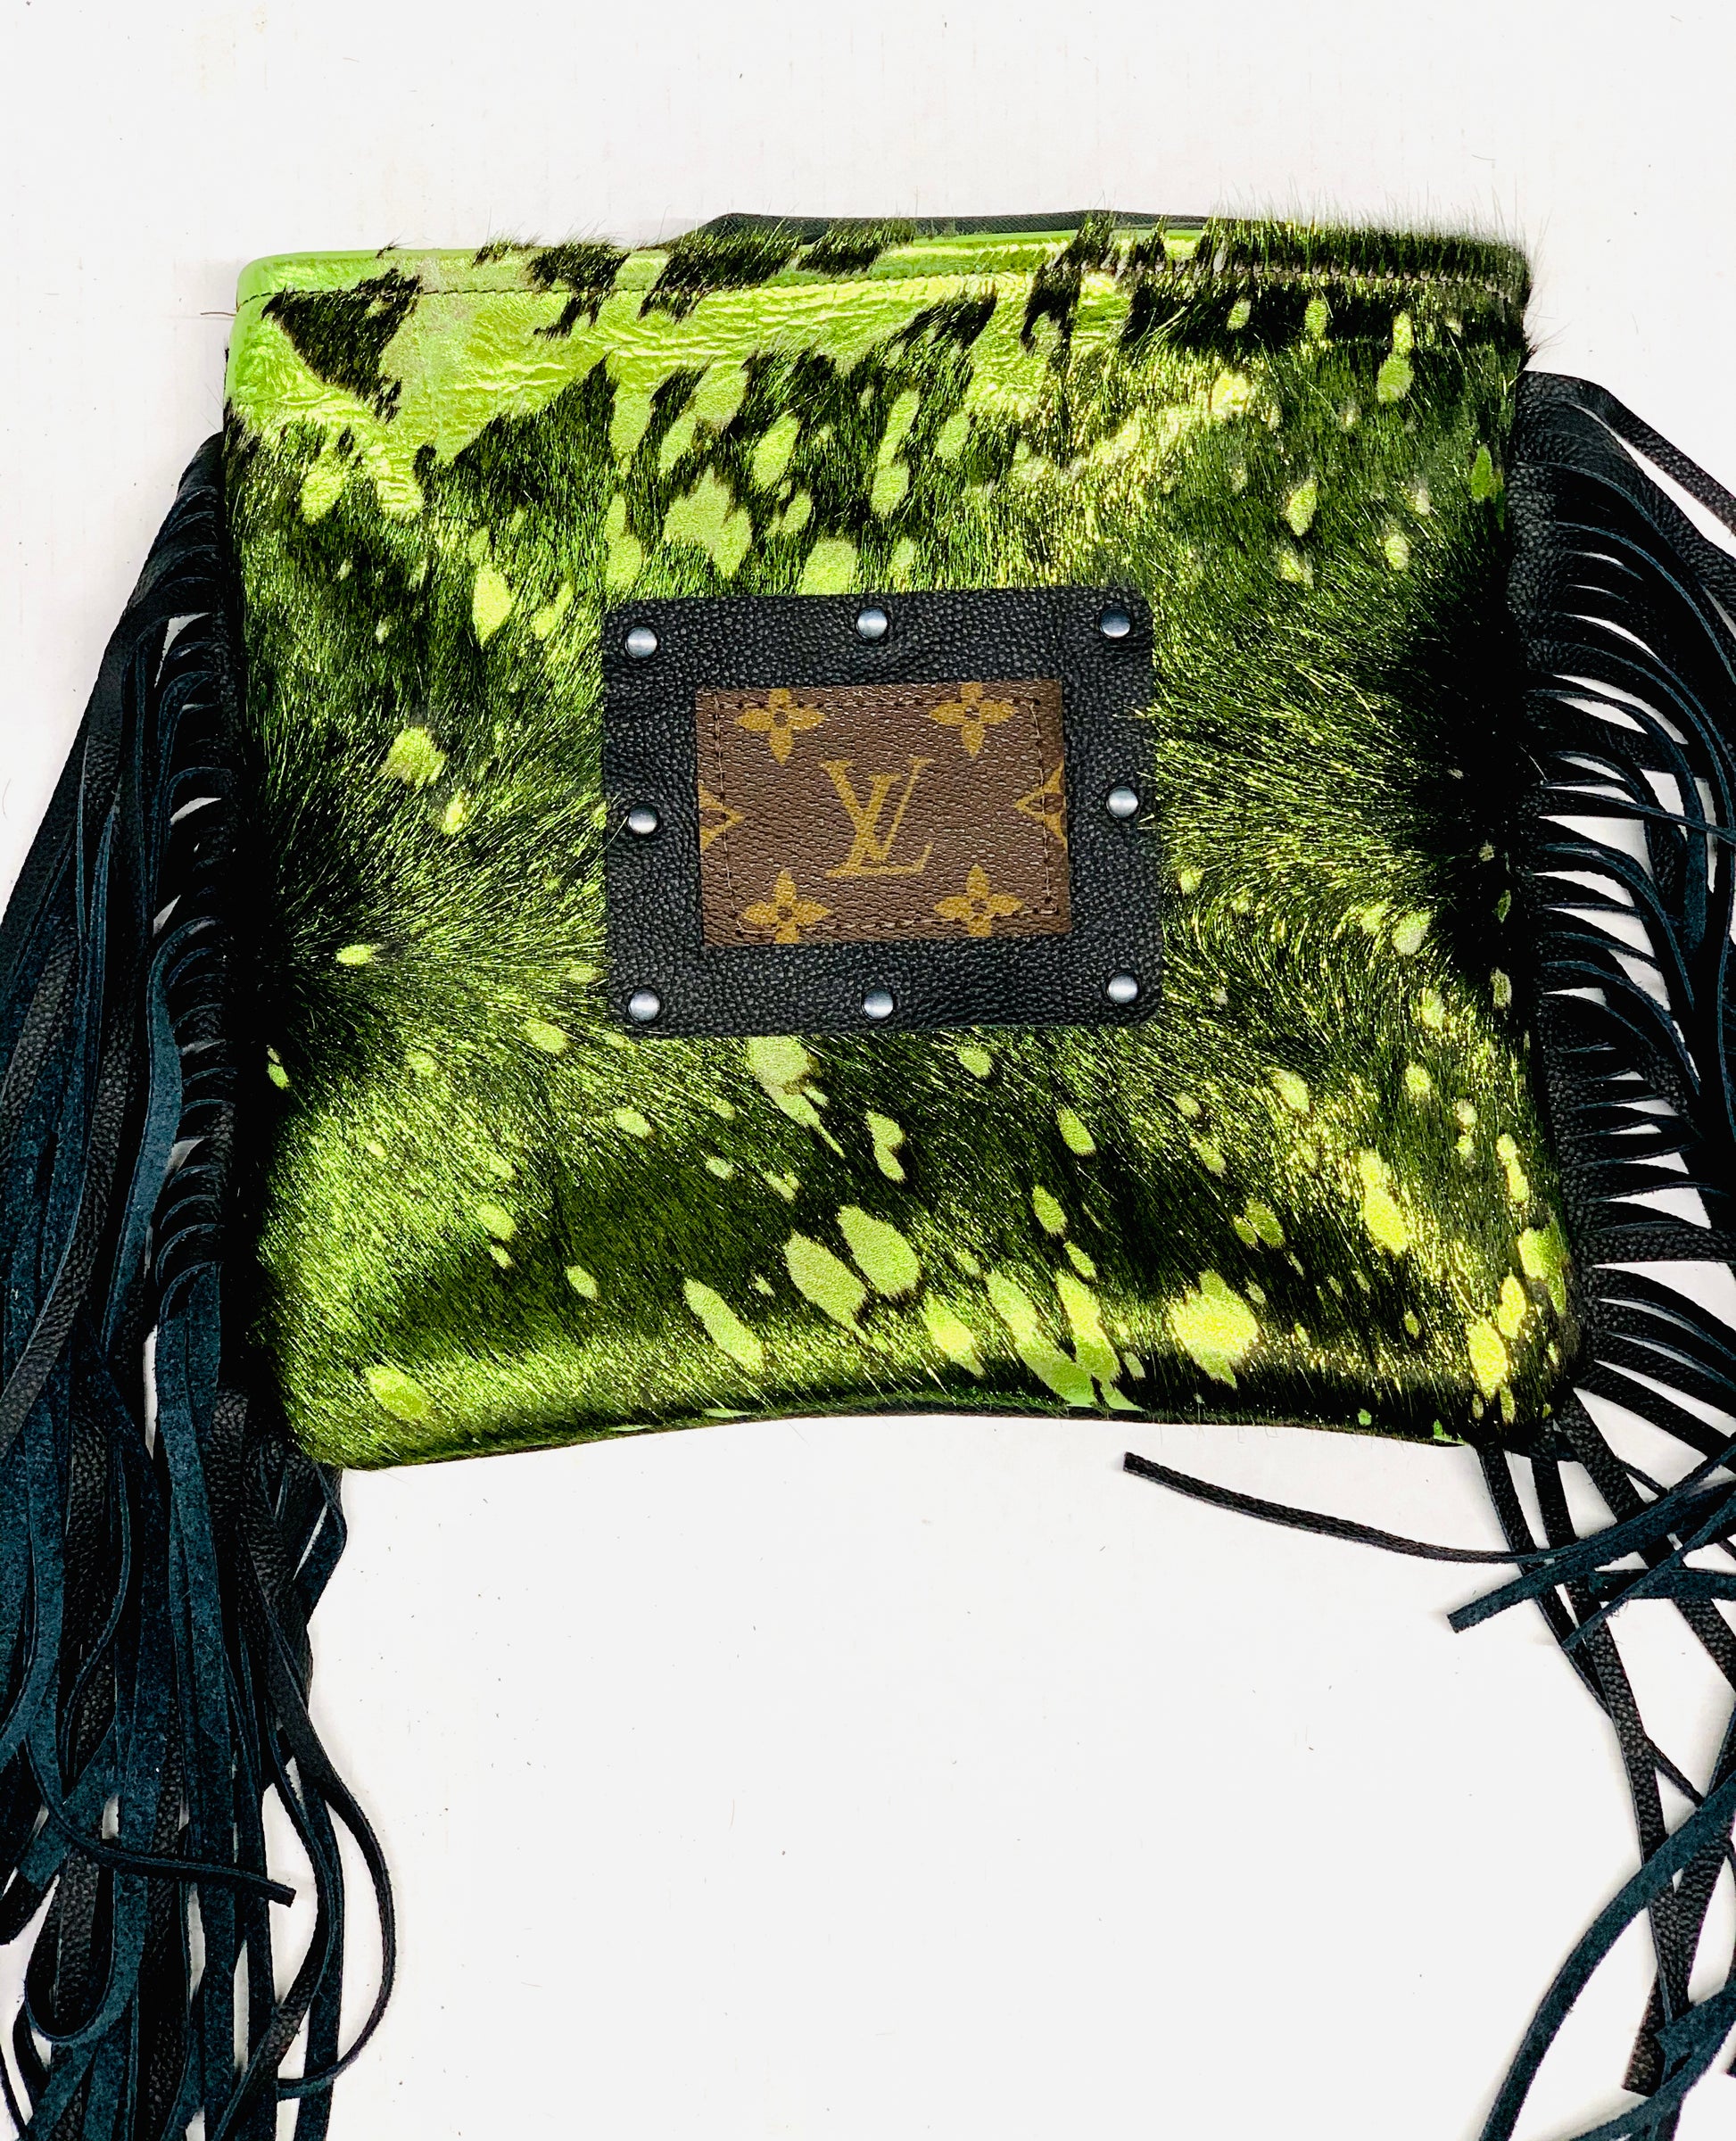 Medium Crossbody - Green with Envy , Black Patch, Black Hardware - Patches Of Upcycling